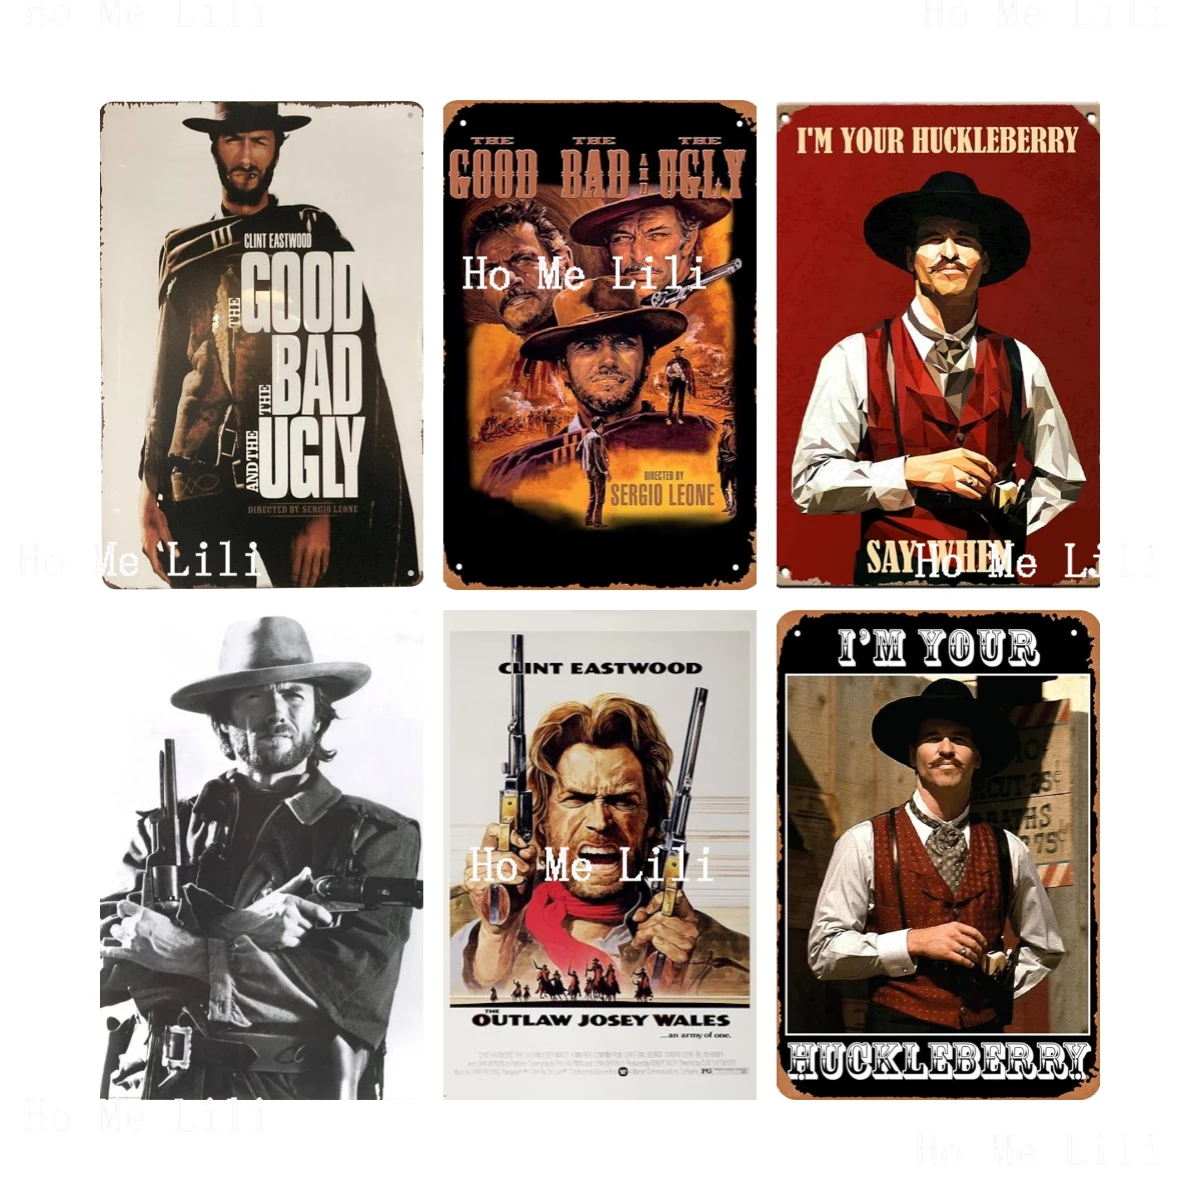 

Clint Eastwood's Good Bad Ugly Art Plaque Classic Western Cowboy Movie Style Printed Sheet Metal Poster Home Wall Decoration